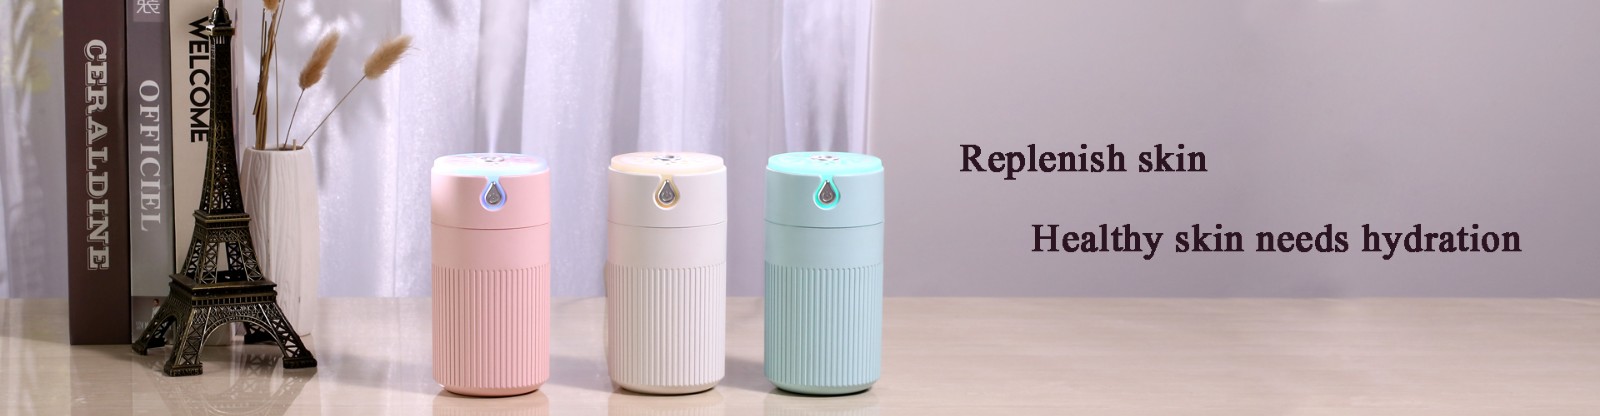 Pengwing-Oem Small Office Humidifier Manufacturer, Best Place To Buy A Humidifier